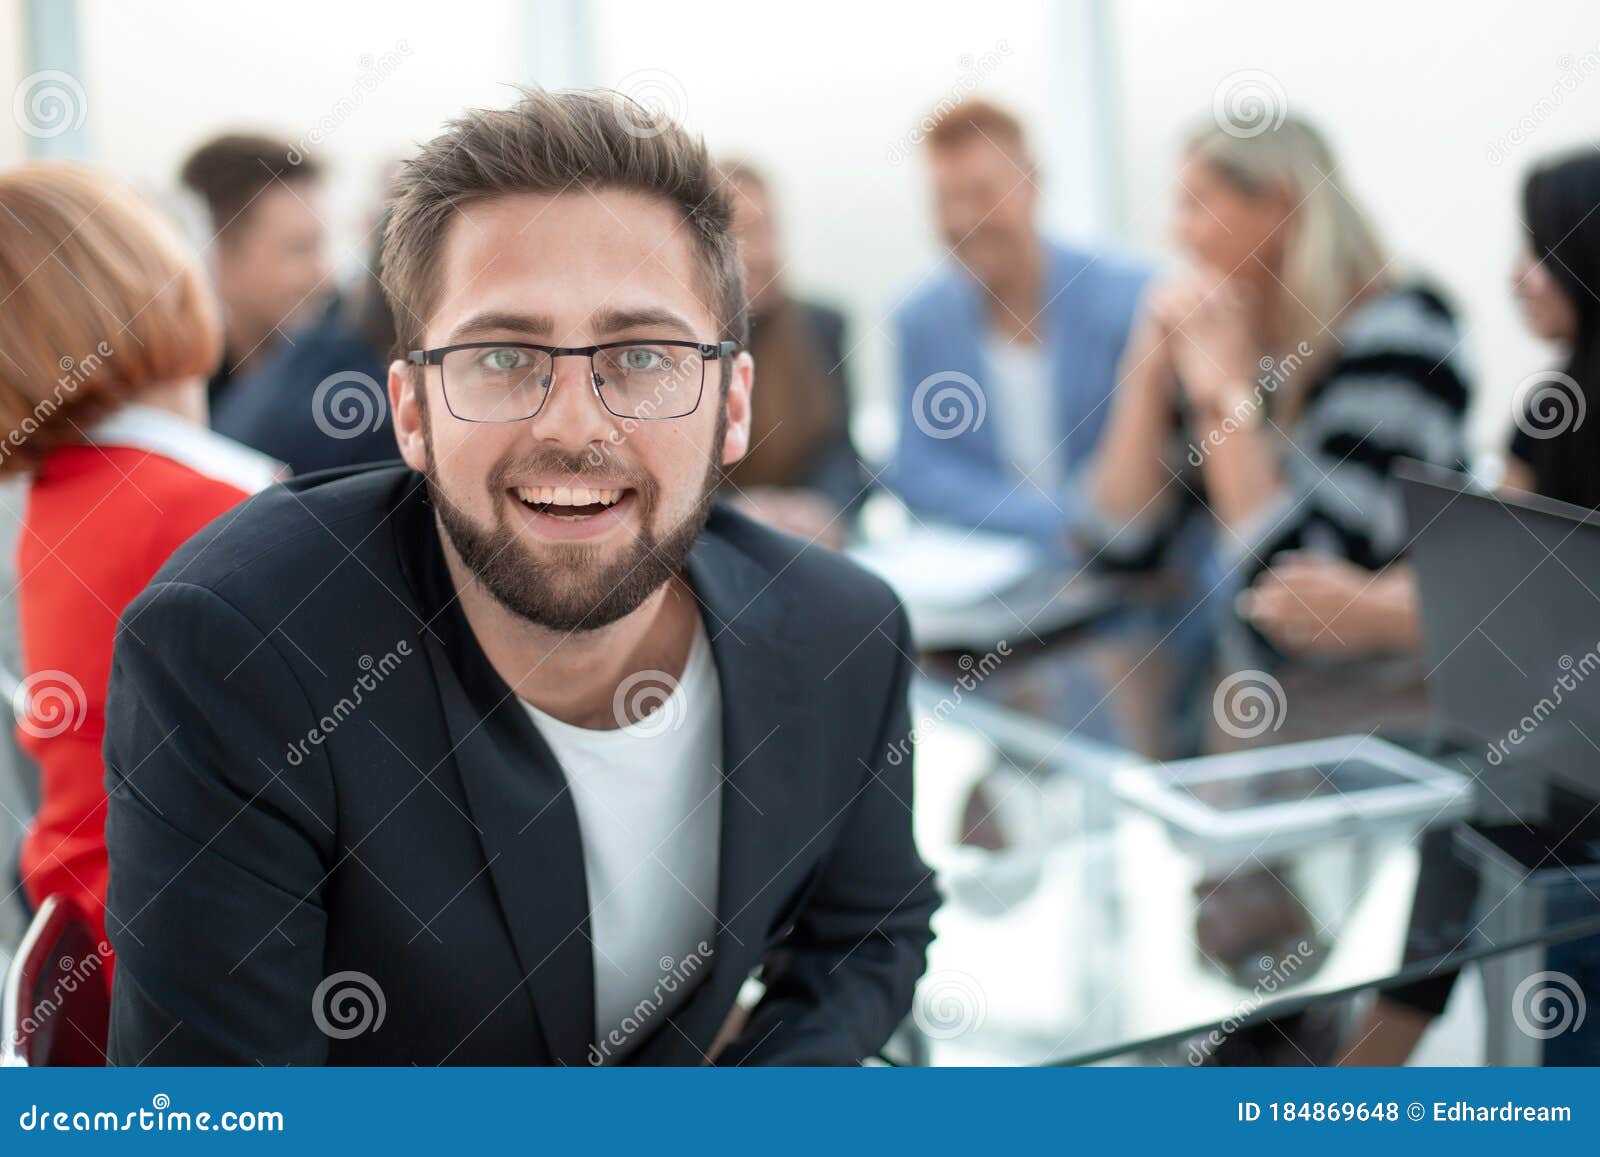 Handsome Smiling Business Man Wearing Eyeglasses Sitting in the Stock ...